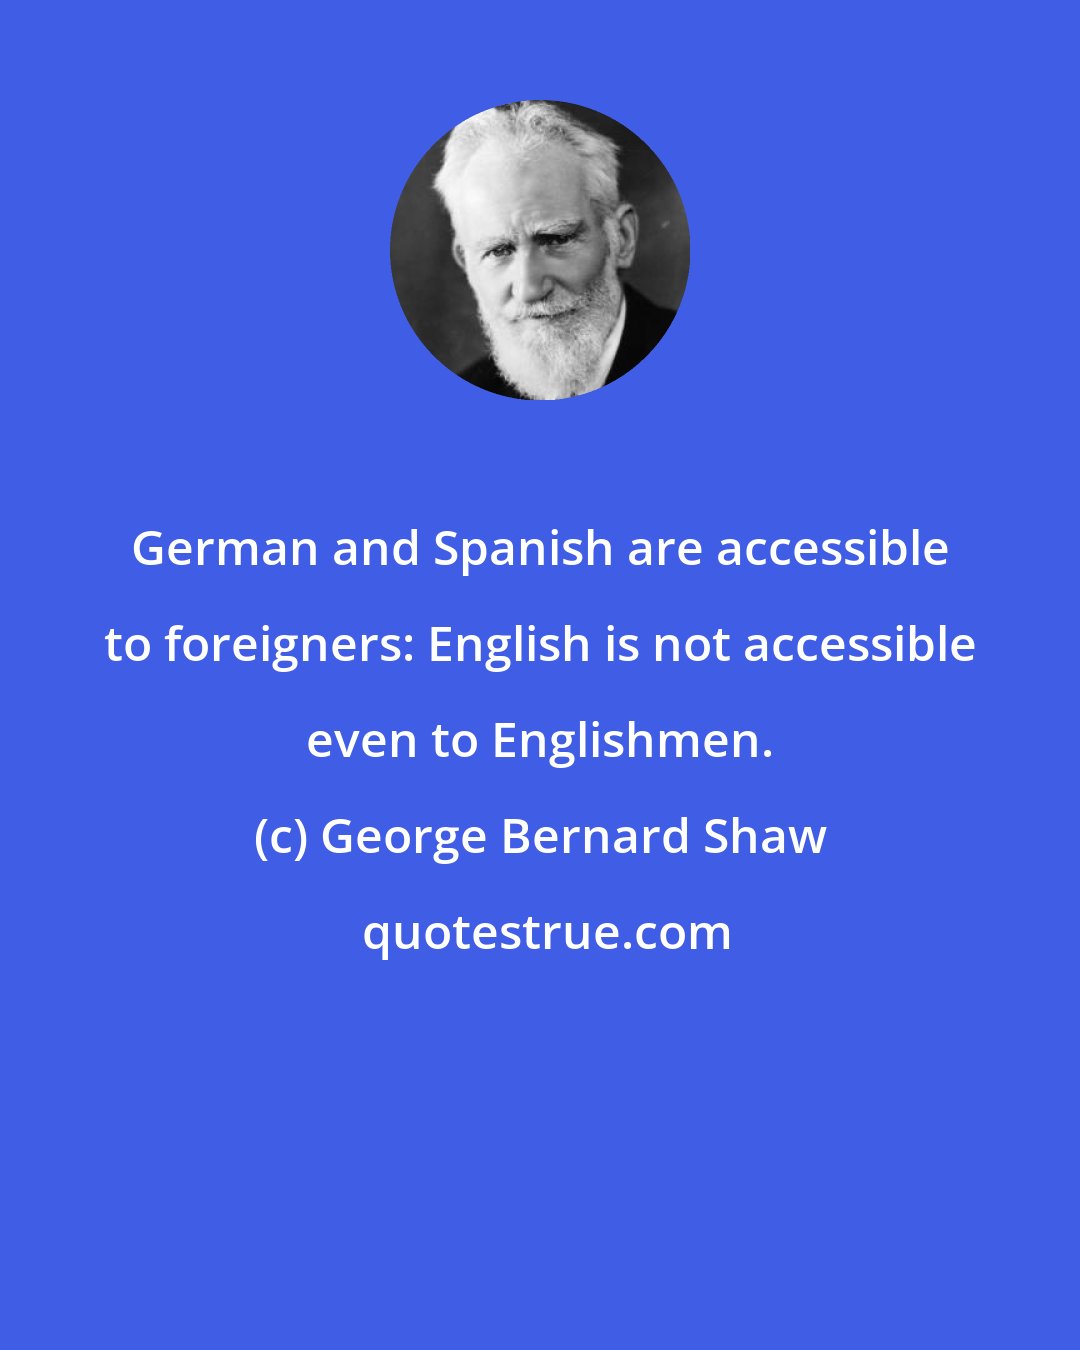 George Bernard Shaw: German and Spanish are accessible to foreigners: English is not accessible even to Englishmen.